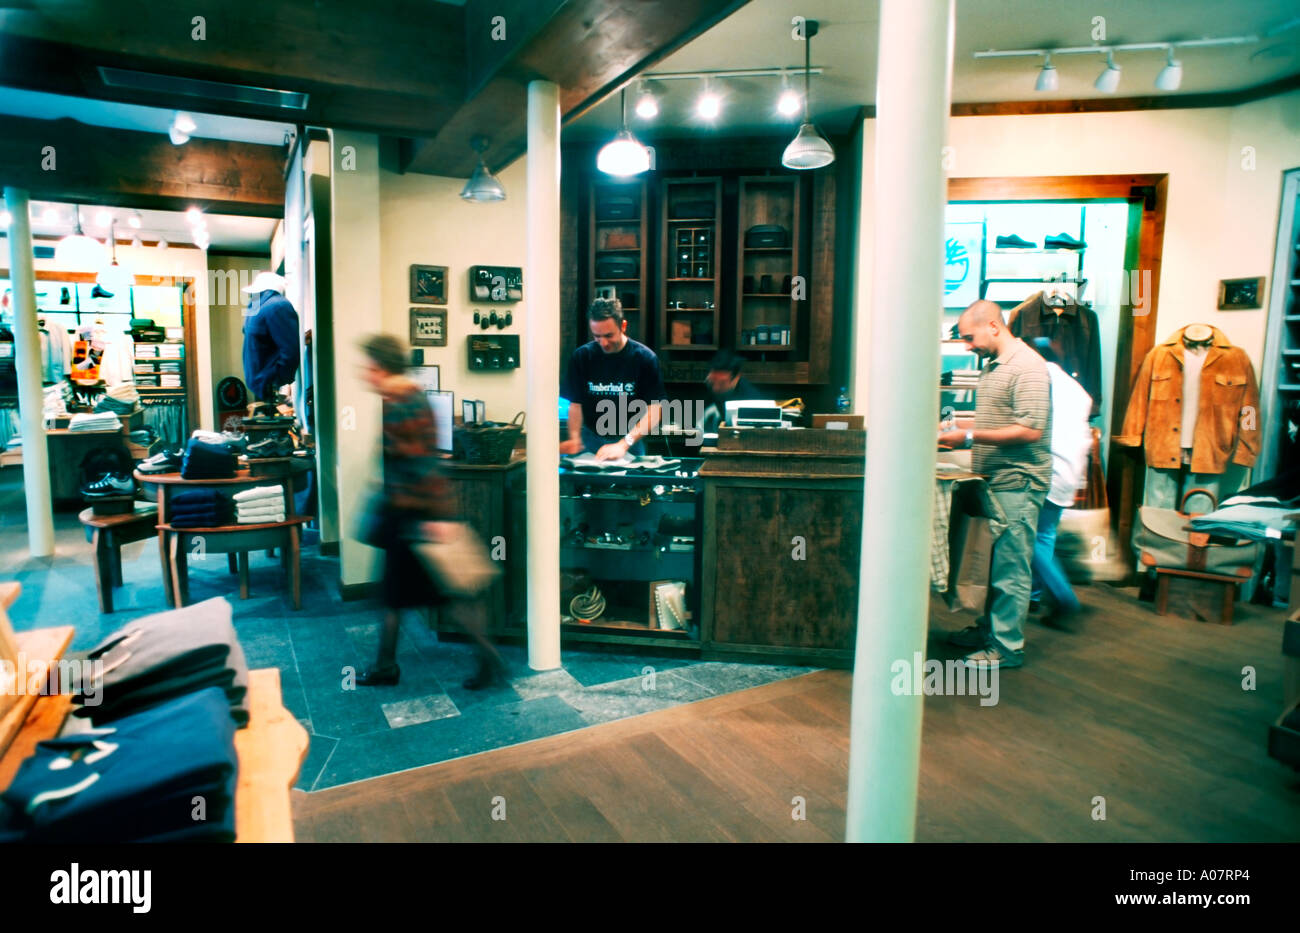 Paris France, Sporting Goods Store "Timberland" Interior People Shopping  (now closed) contemporary retail interior design Stock Photo - Alamy